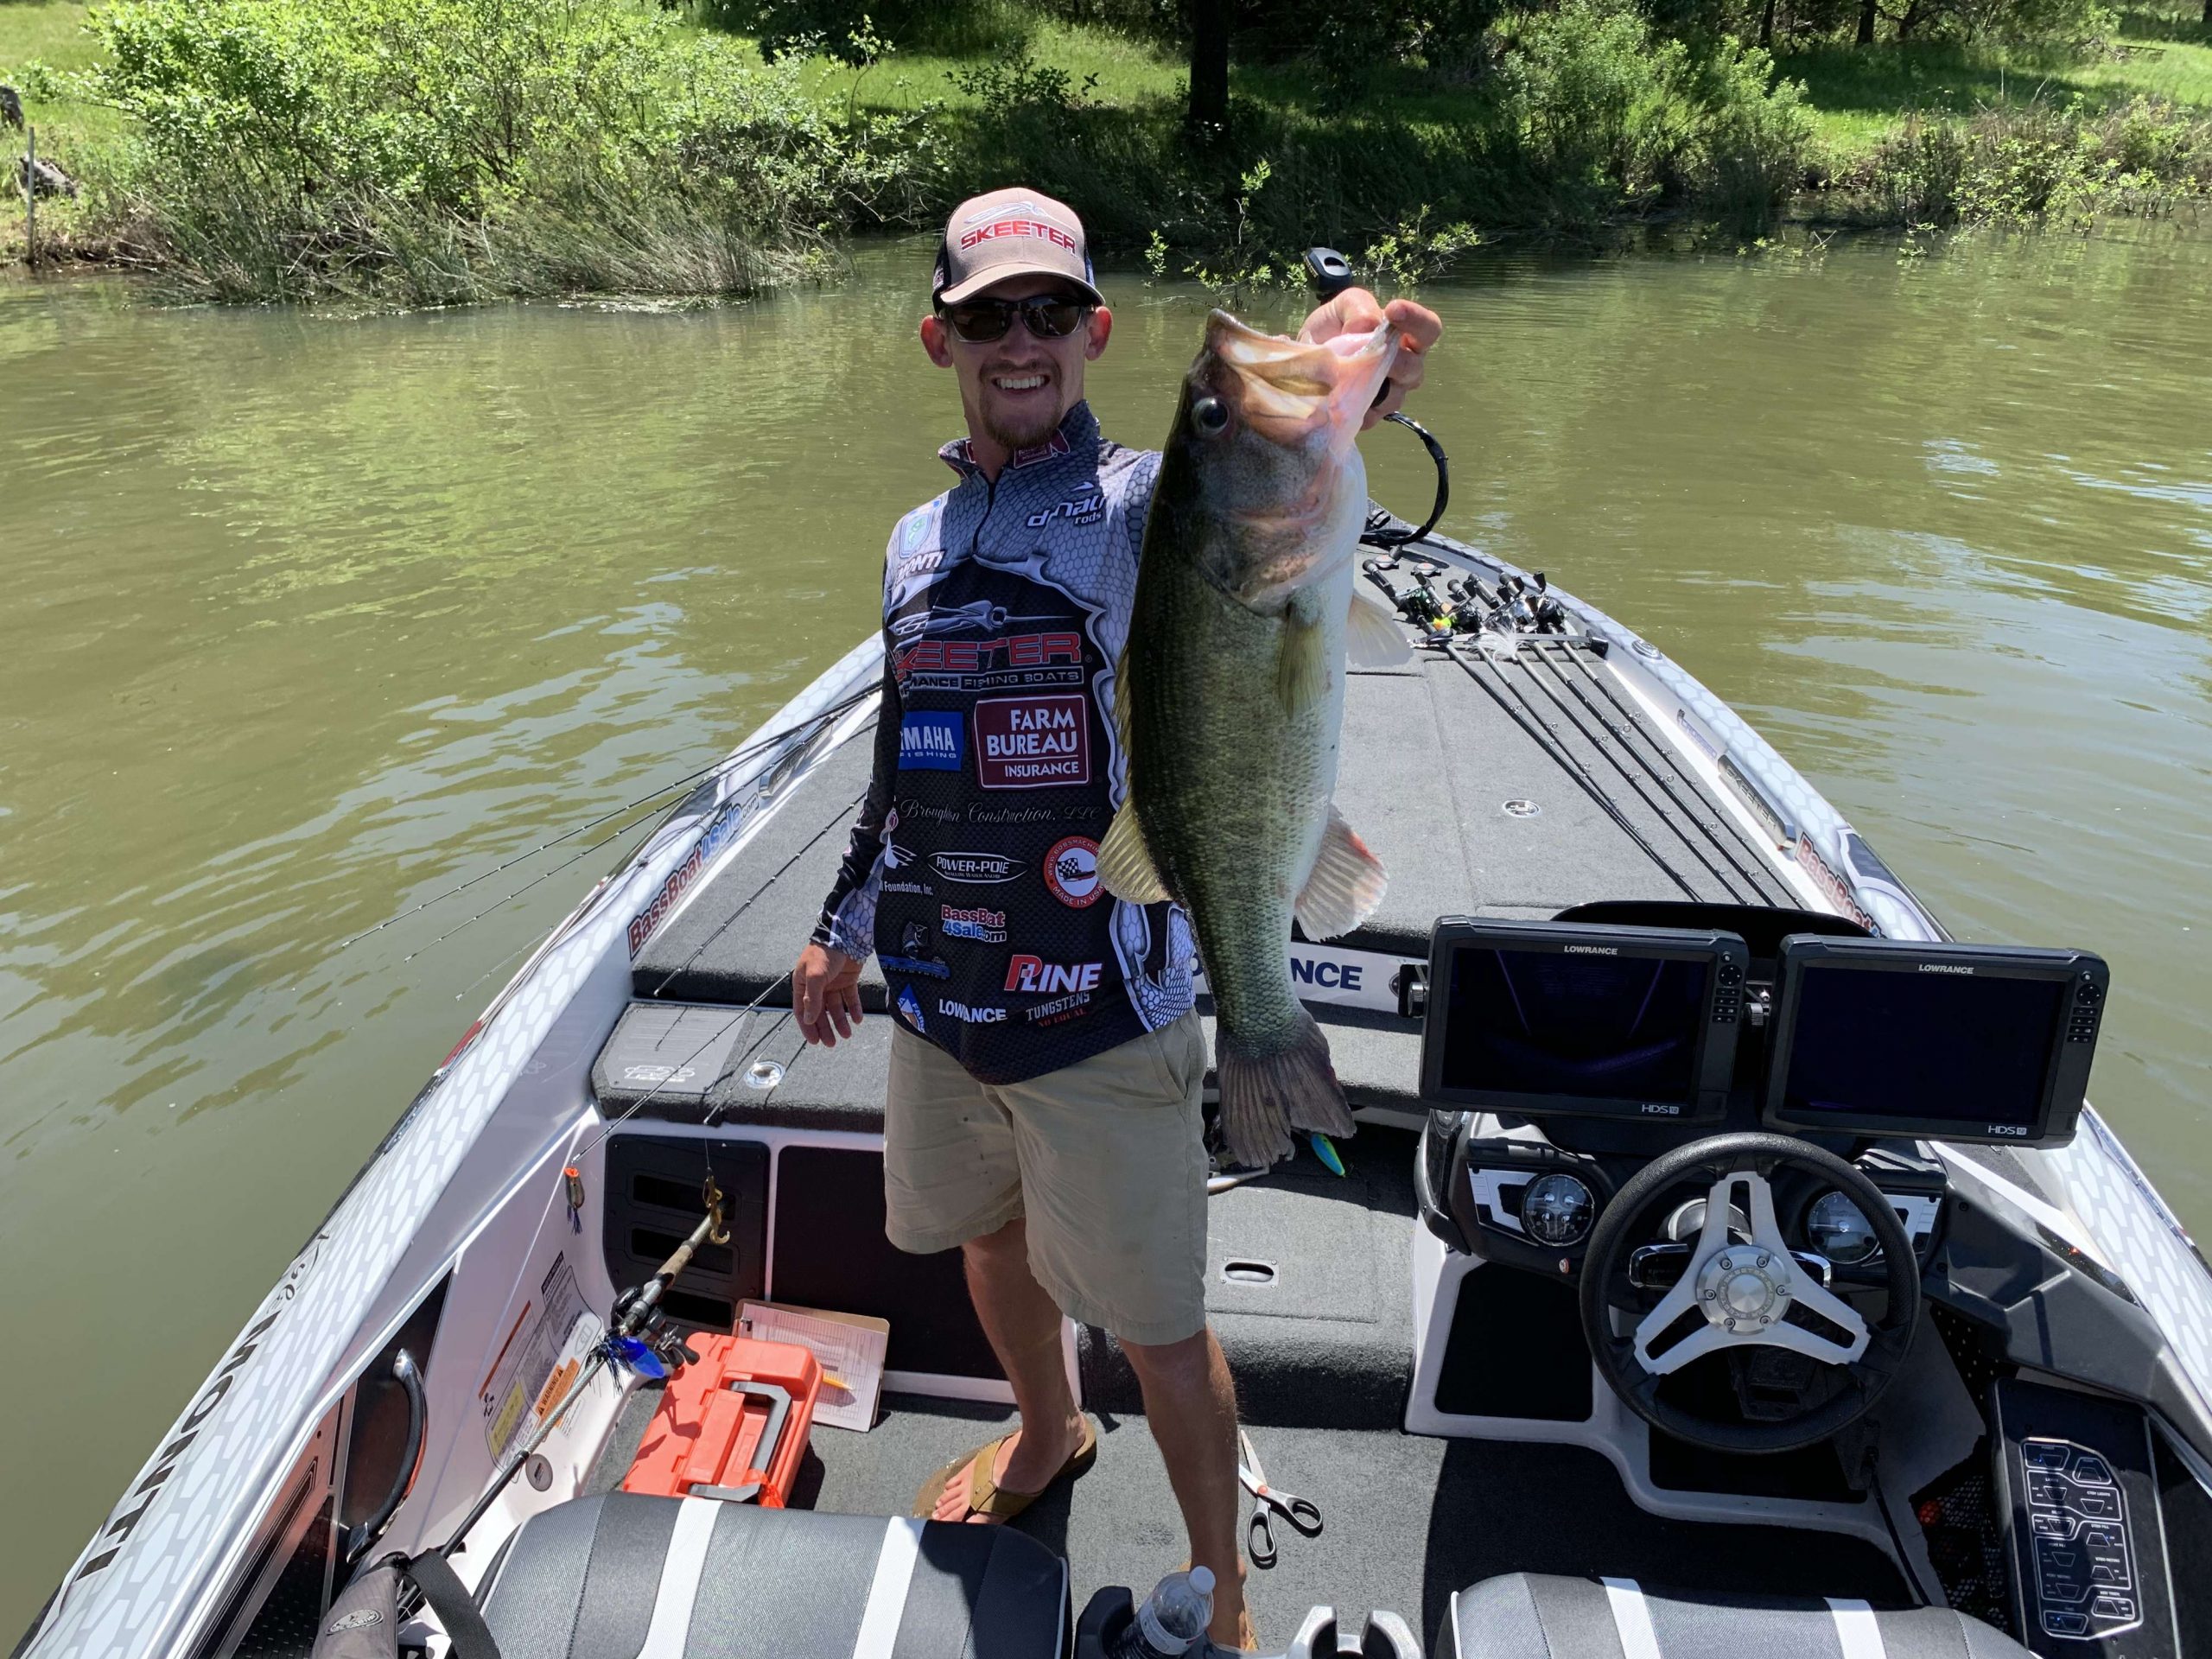 Kyle Monti has made a move into the top 10 of the biggest fish. He just landed an 8-pound even largemouth. Thatâs the third largest fish of the day.